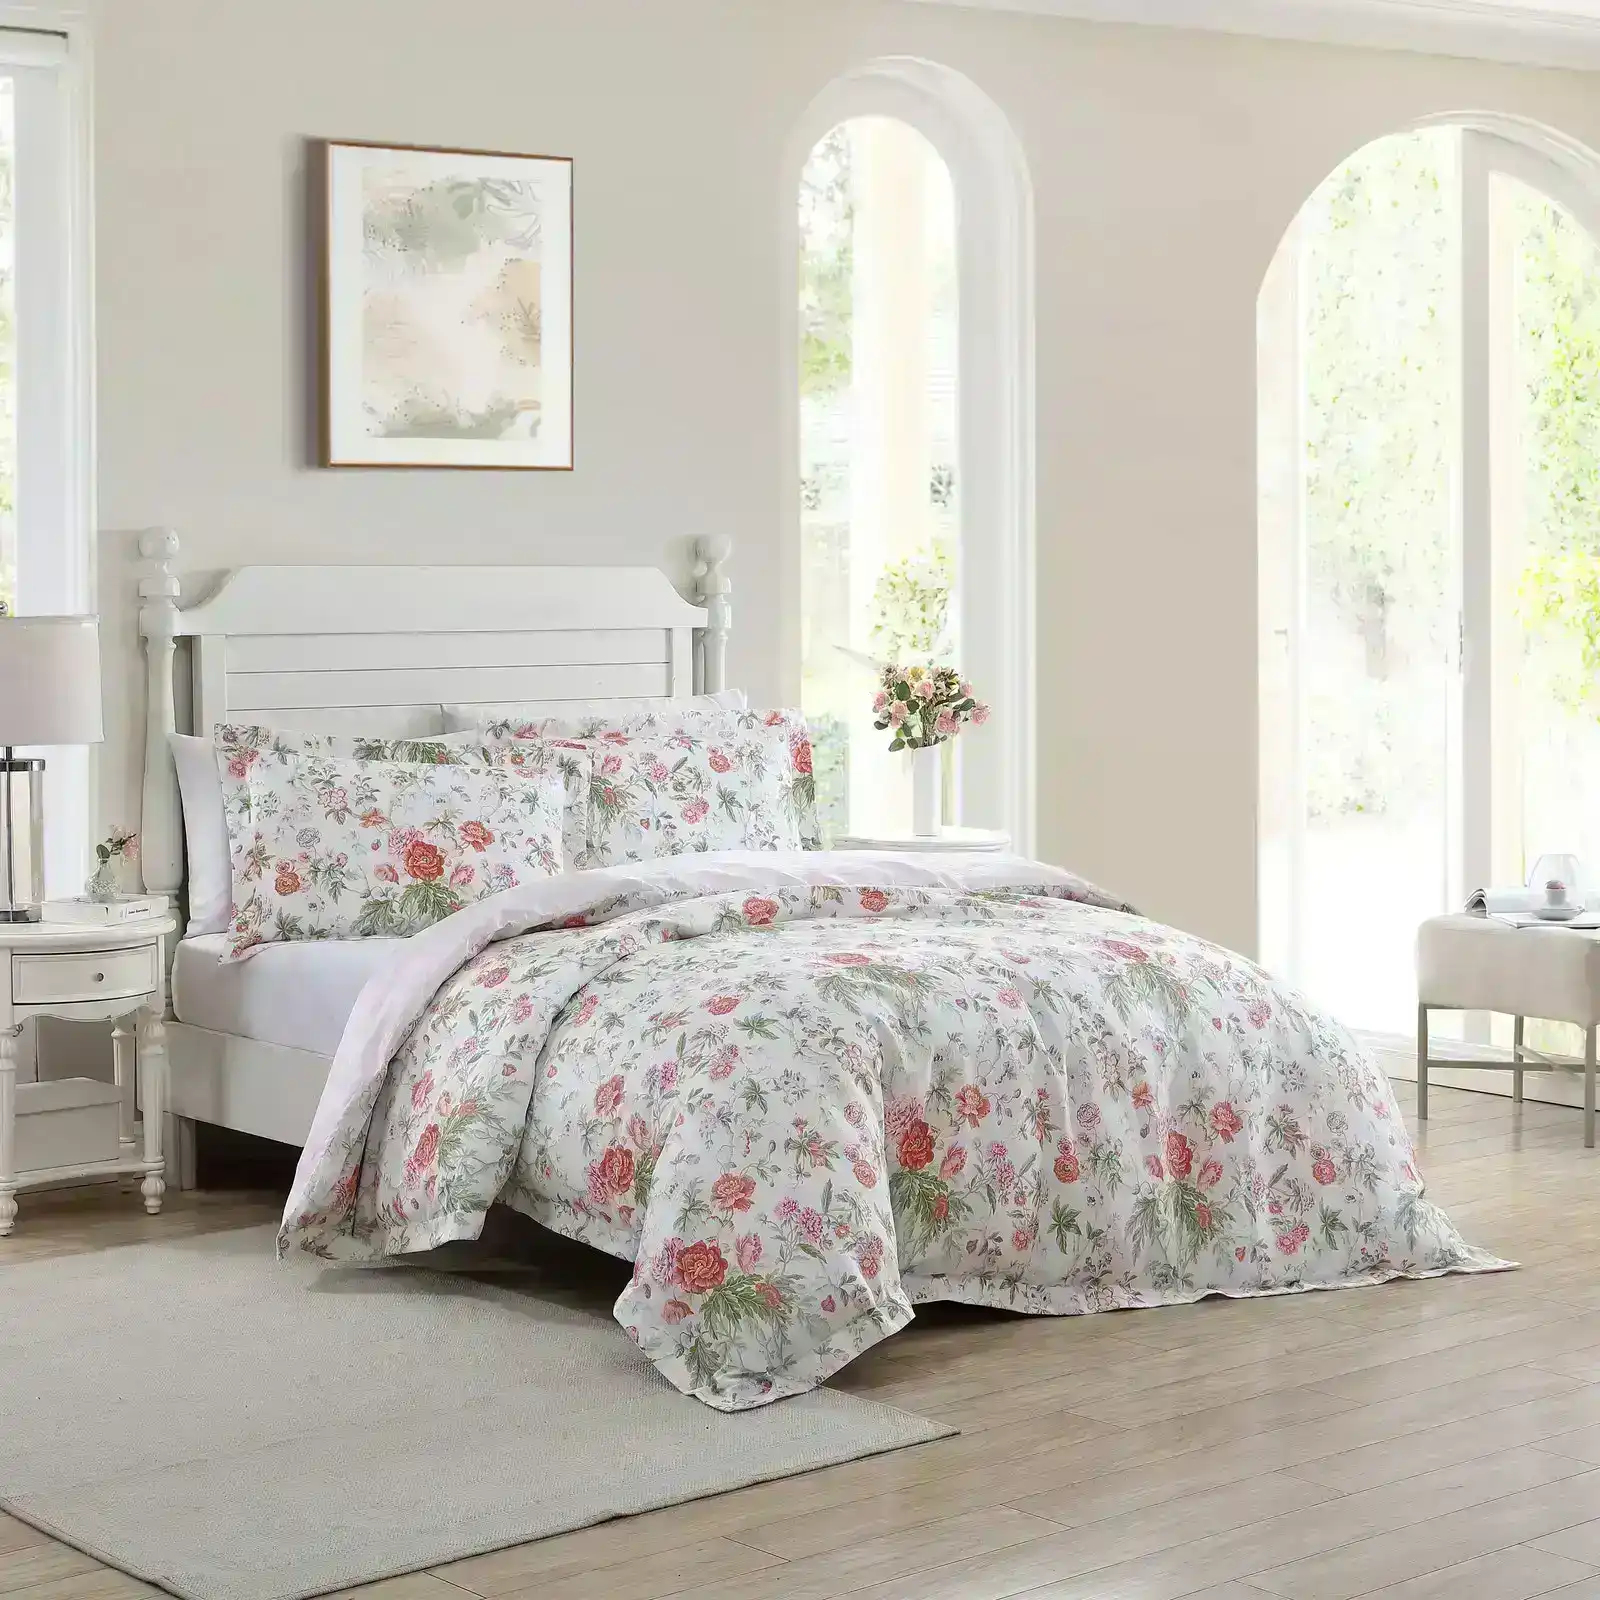 Laura Ashley King Bed Breezy Floral Cotton Quilt Cover/2x Pillowcases Set Coral